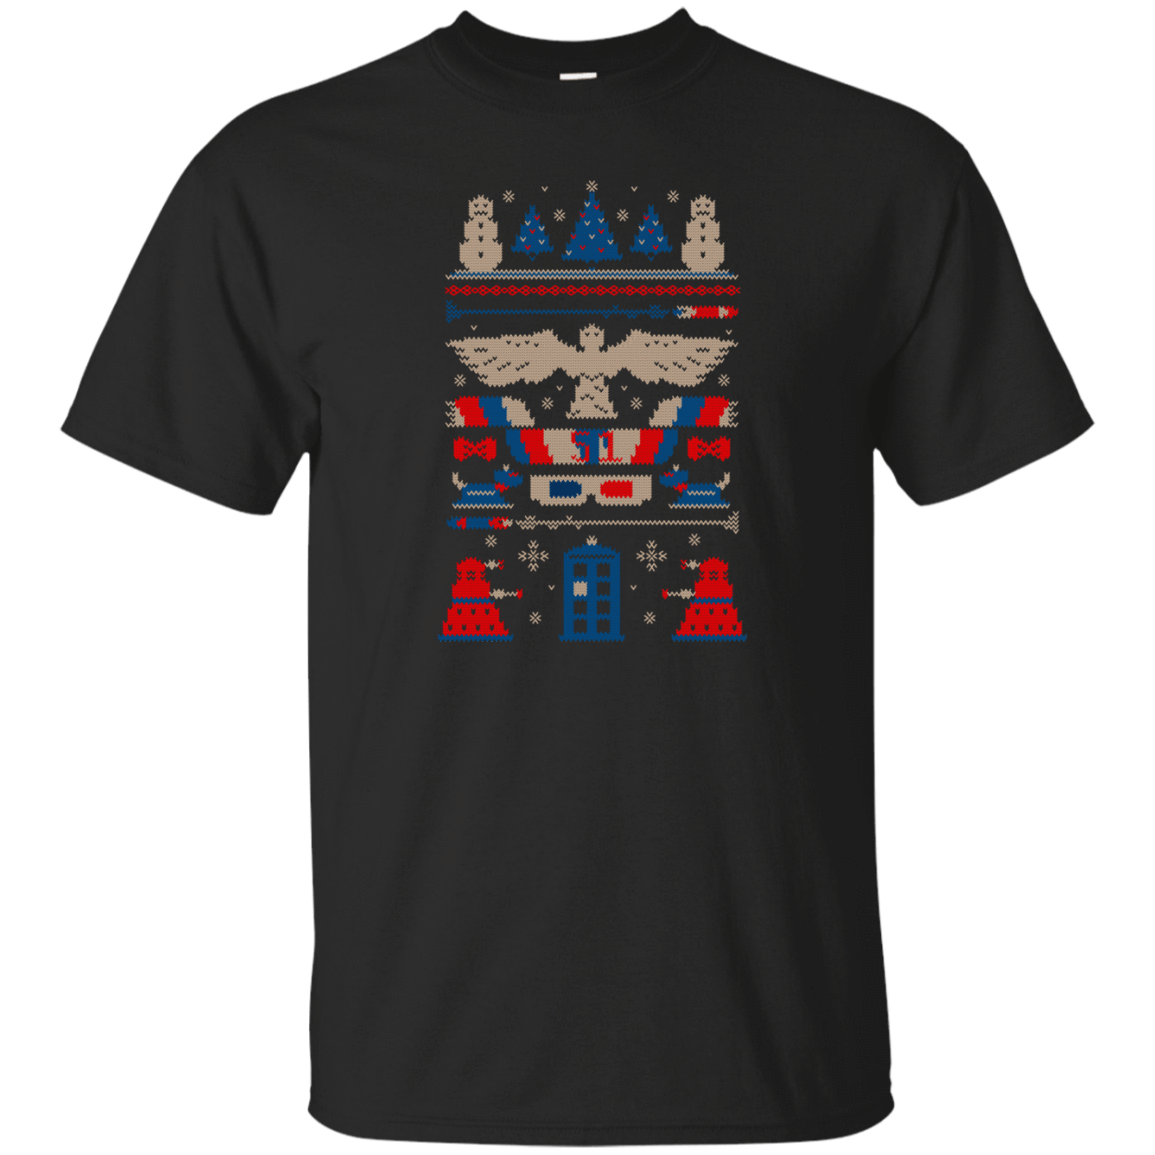 T-Shirts Black / Small Ugly Who Sweater T-Shirt